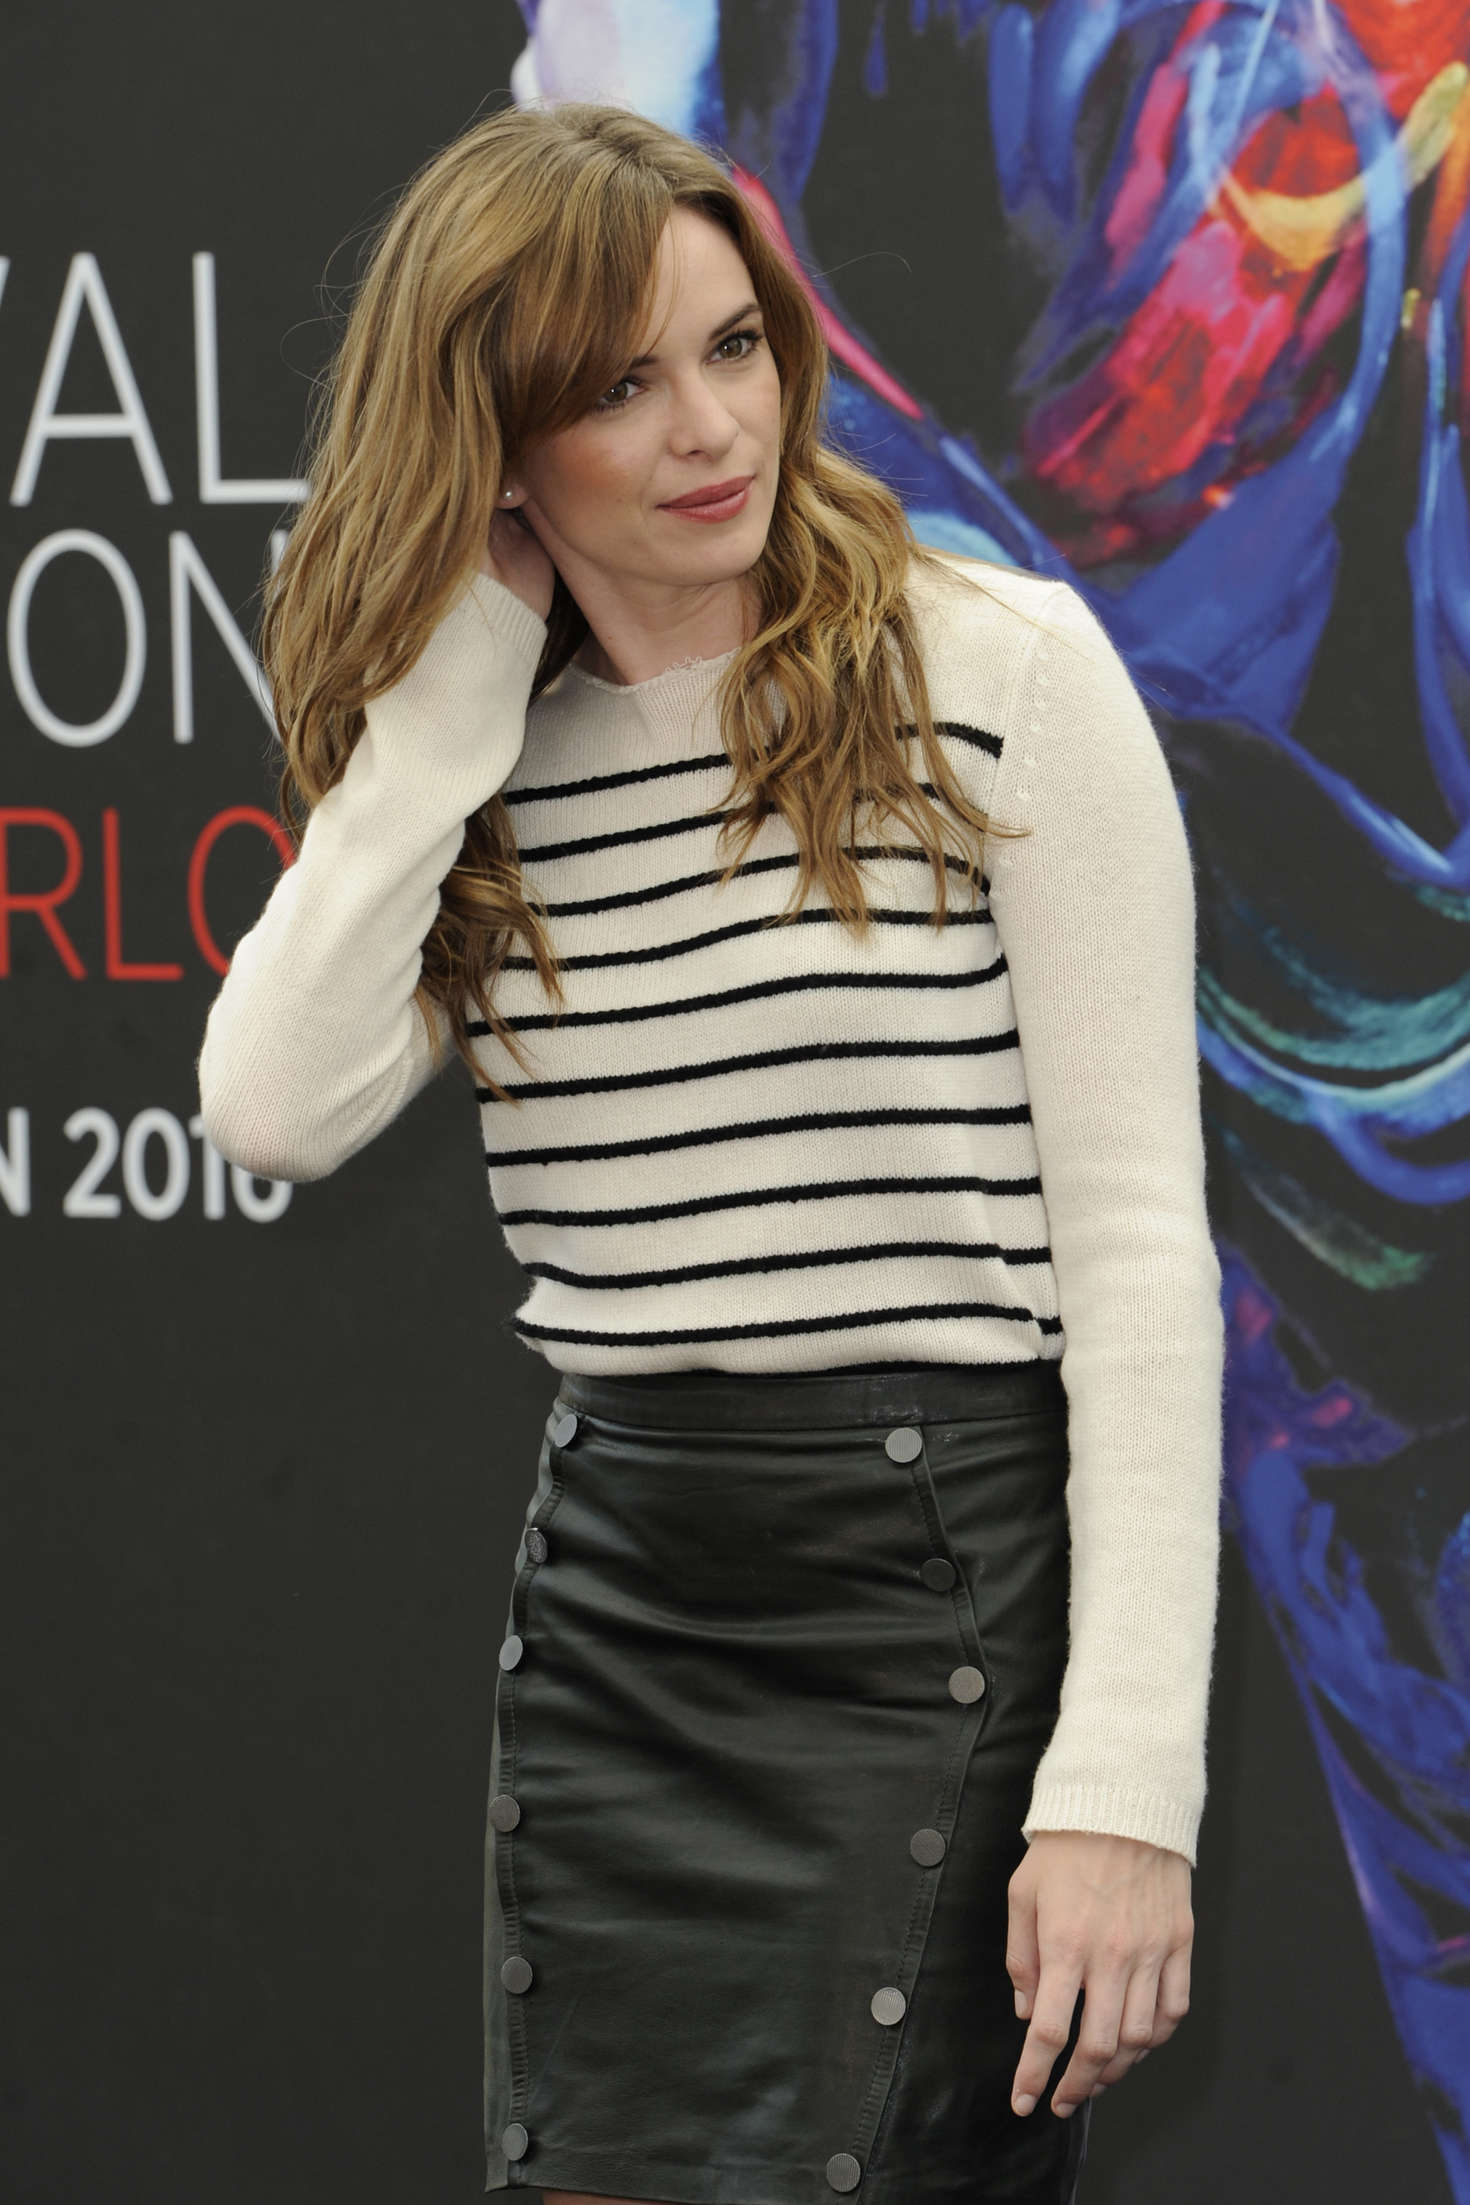 Danielle Panabaker attends The Flash Photocall